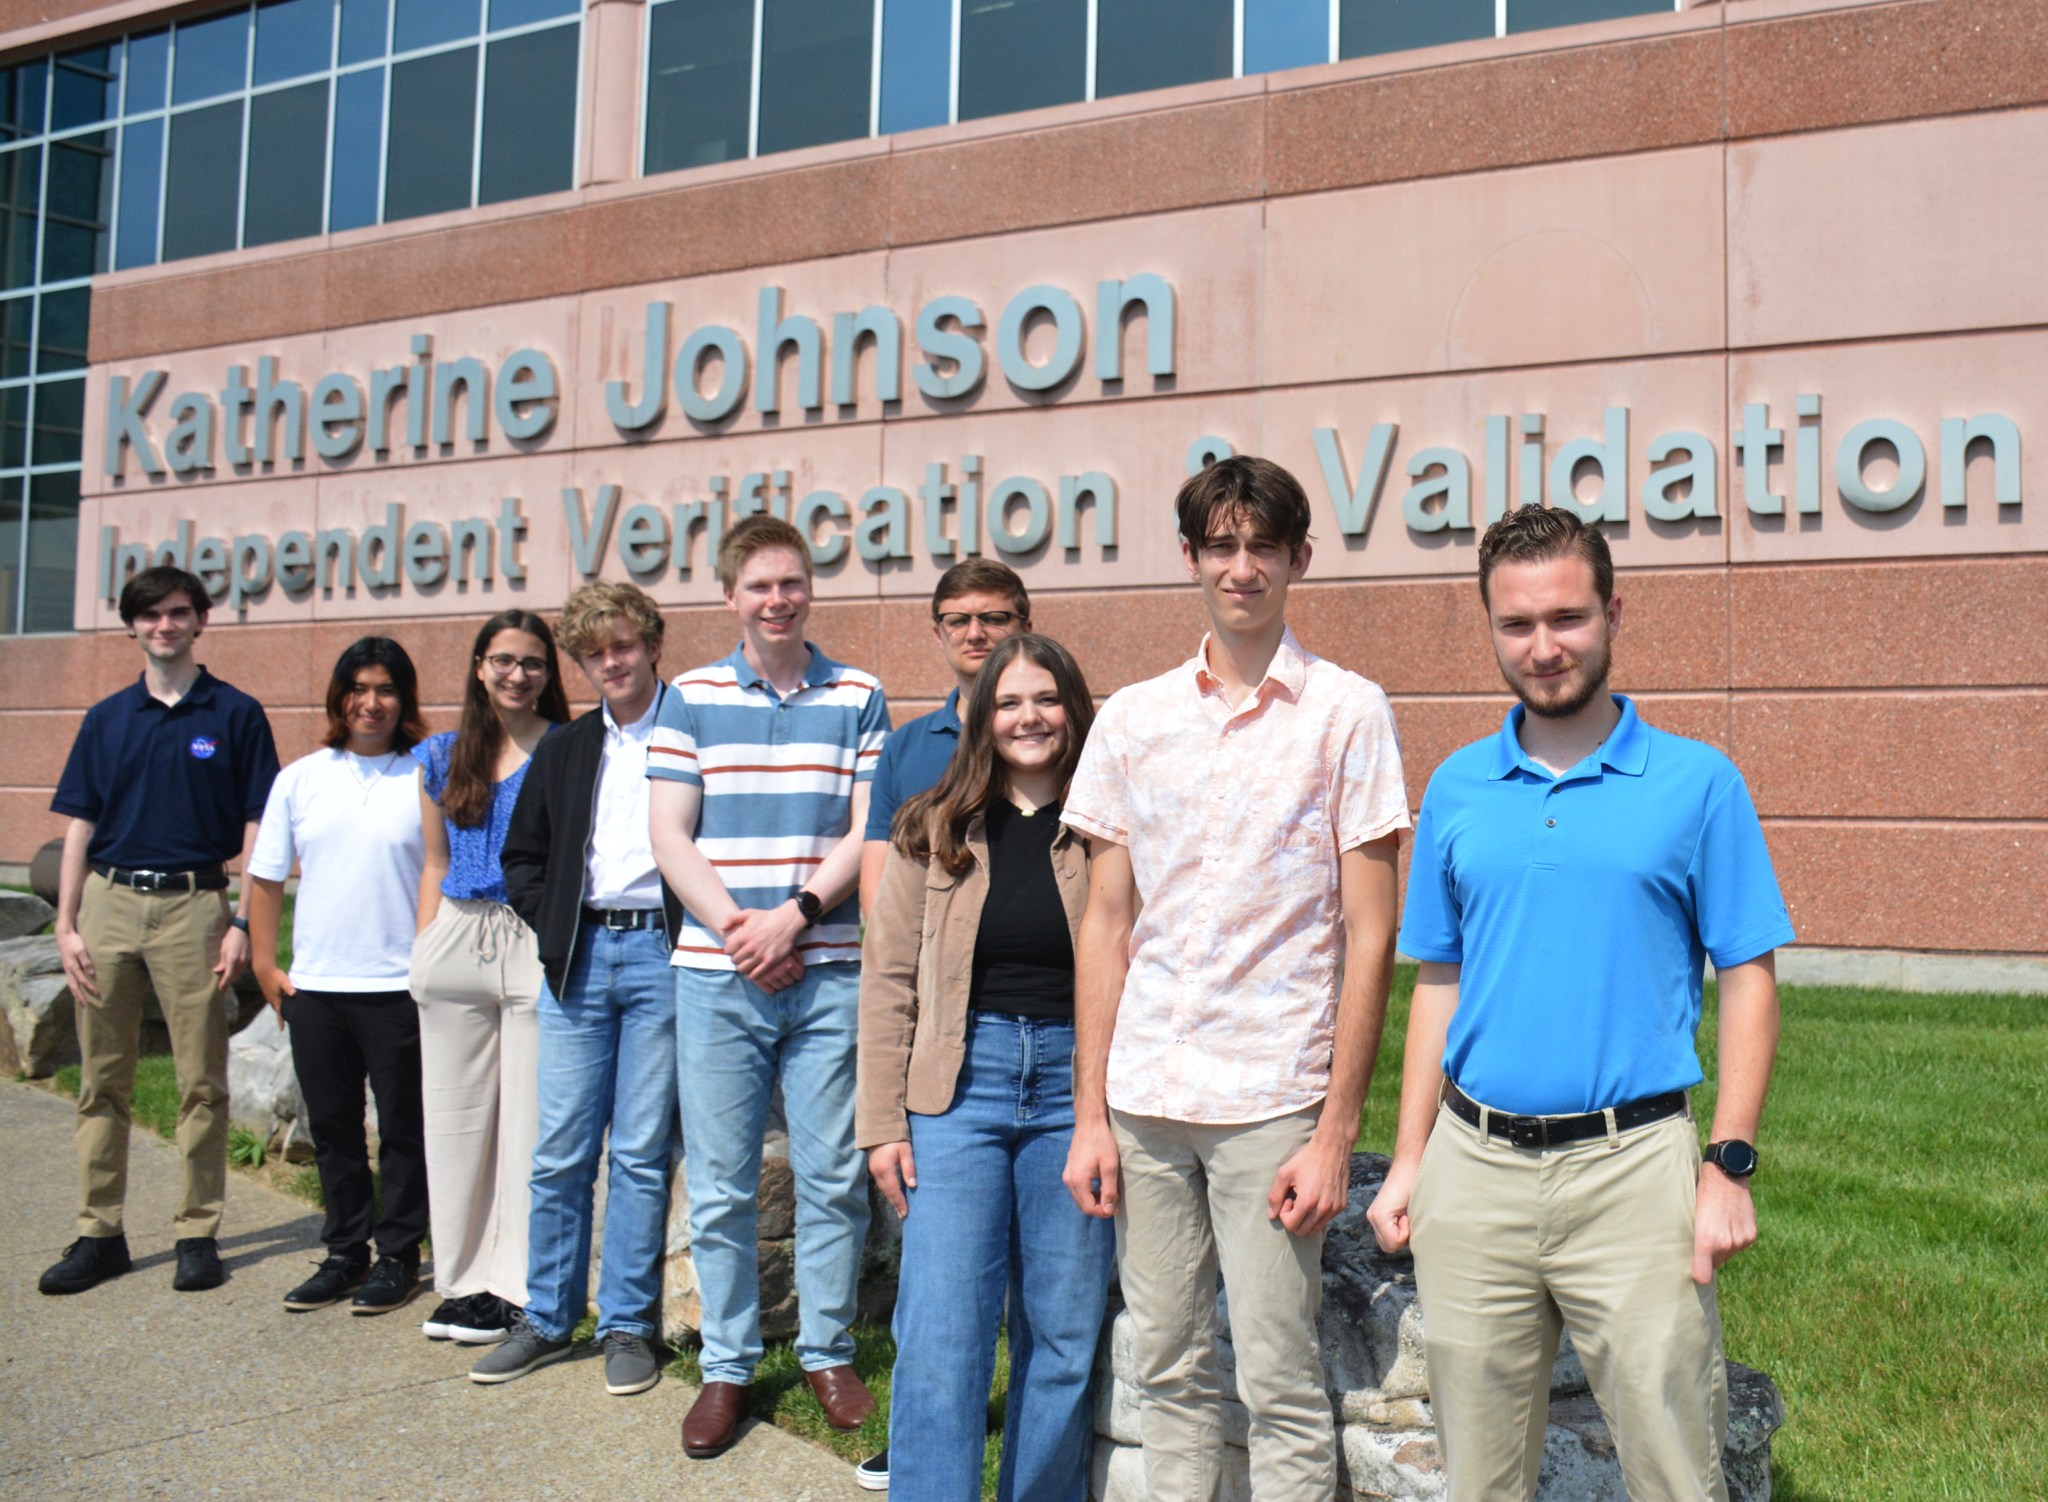 Nine high school and college interns standing in front of the Katherine Johnson IV&V Facility